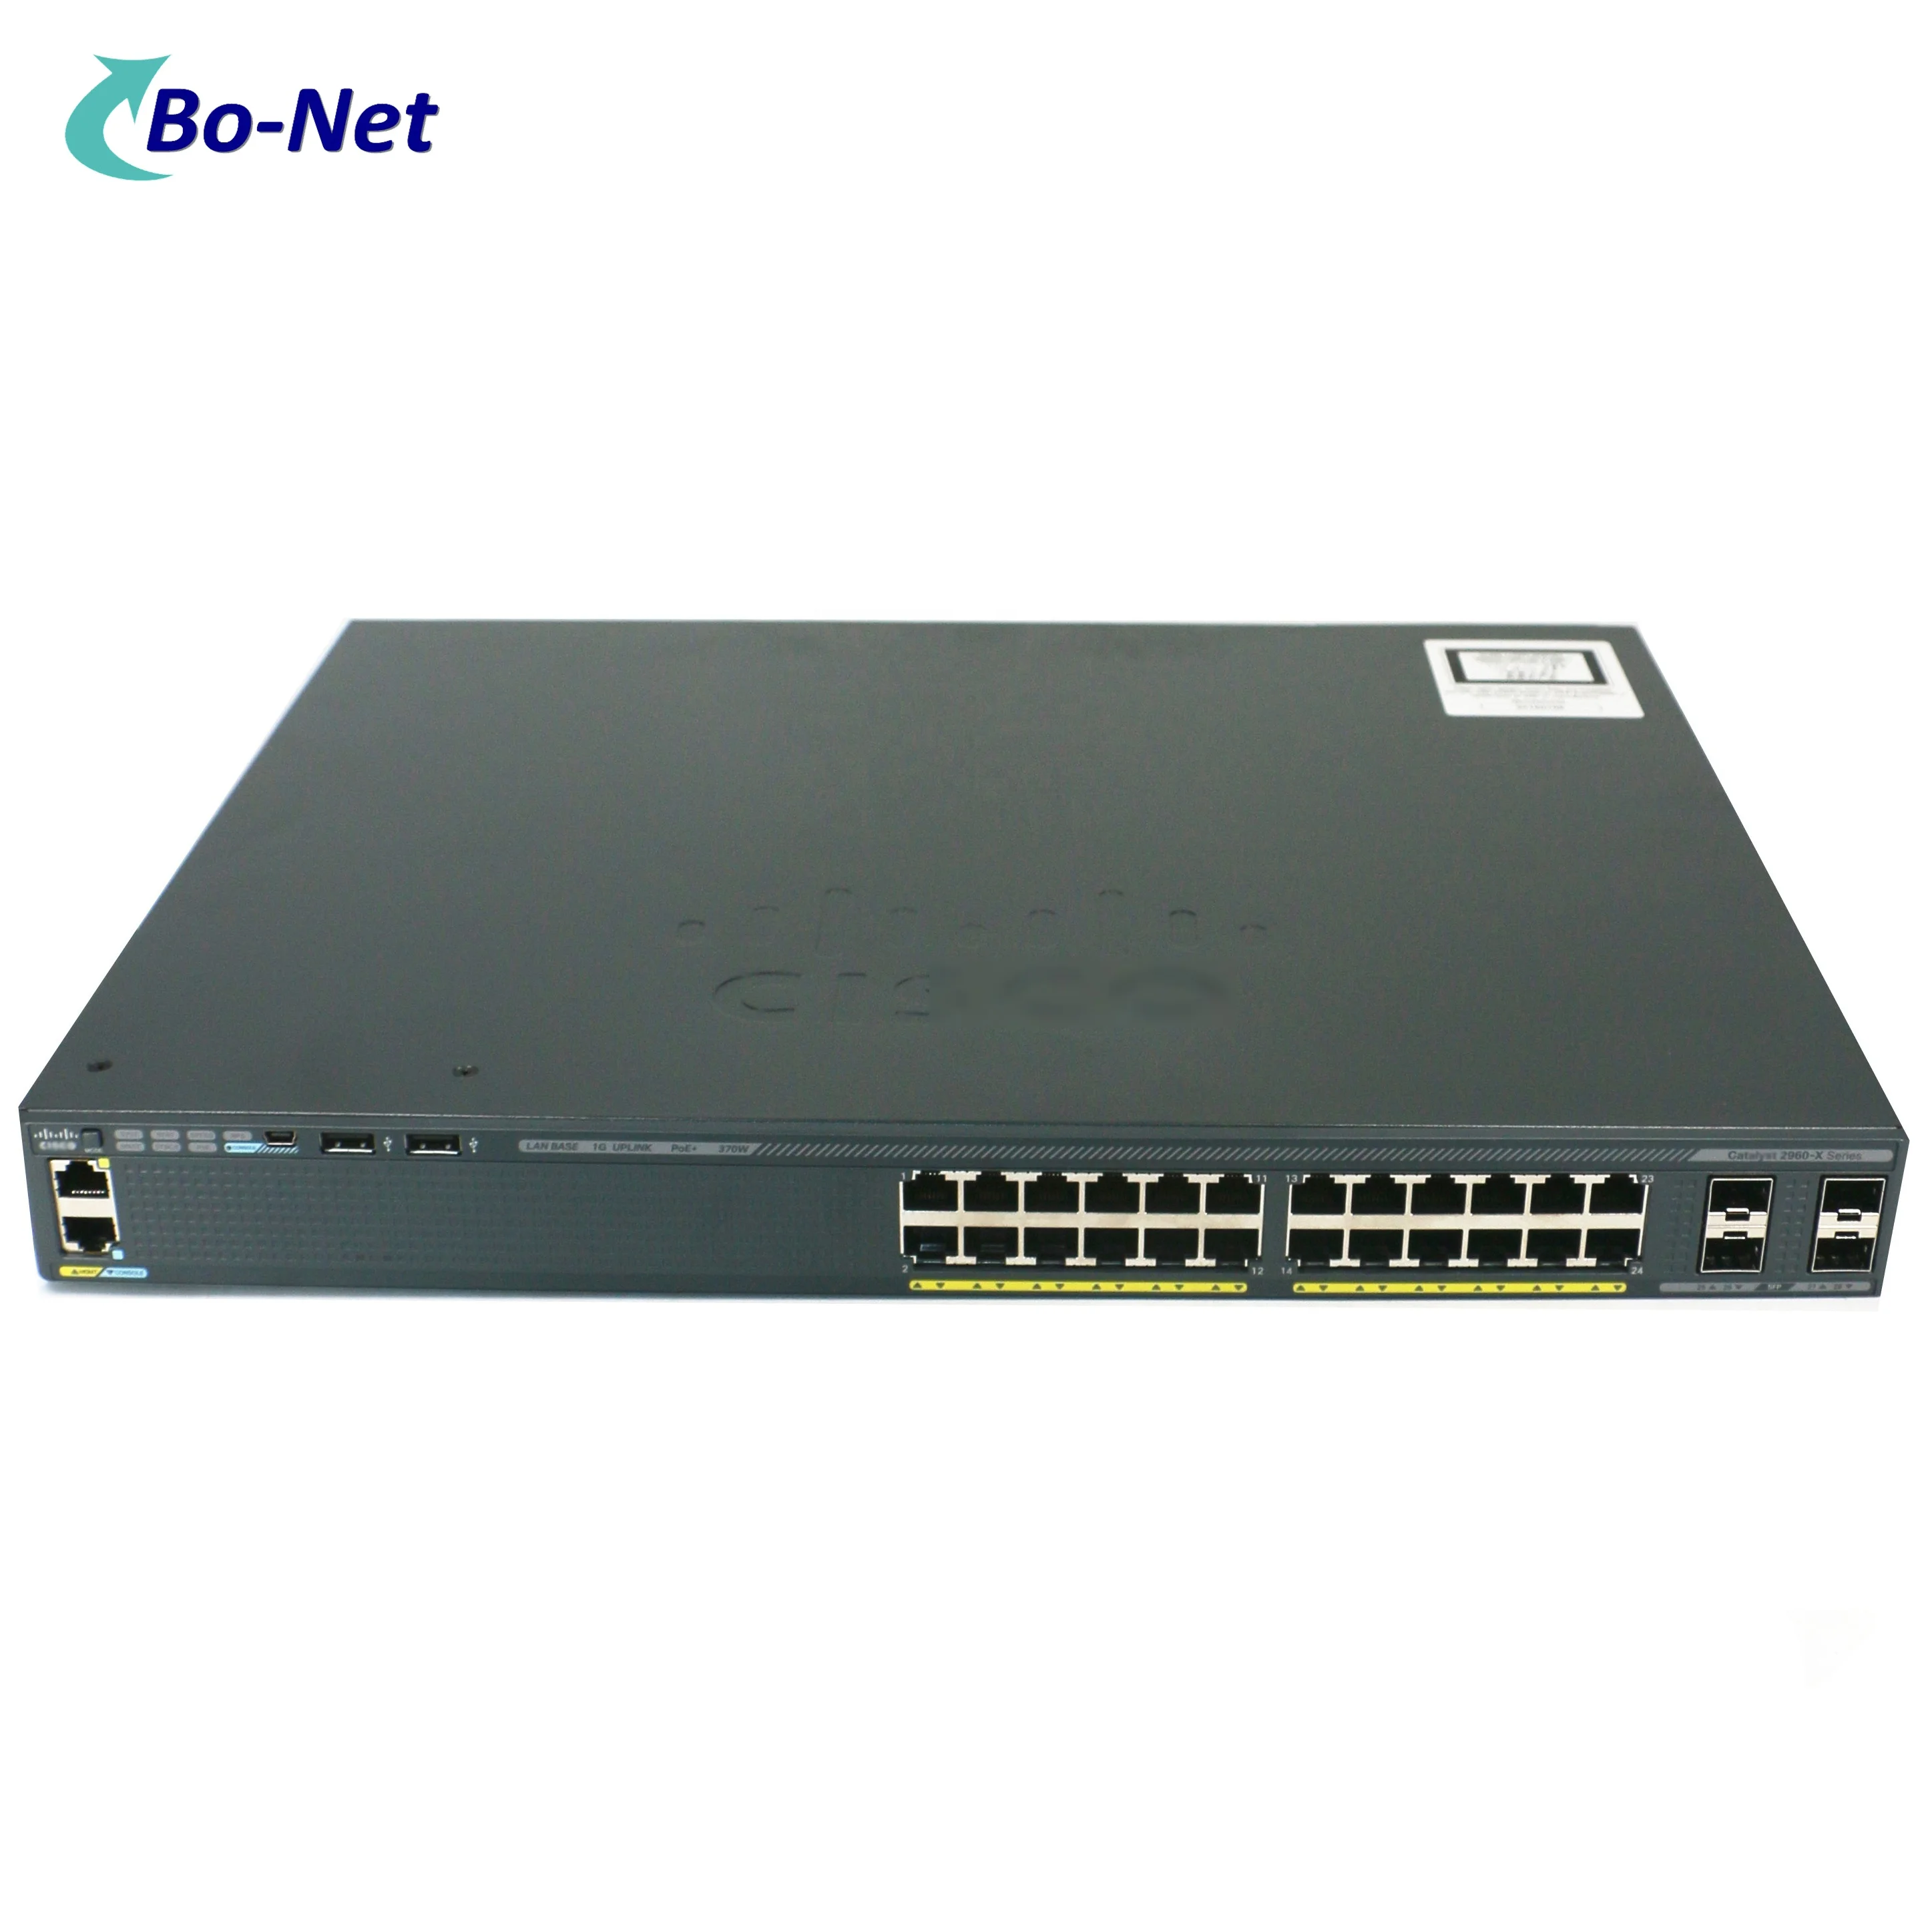 

WS-C2960X-24PS-L 24port Poe Managed Network Switch 2960-X Series